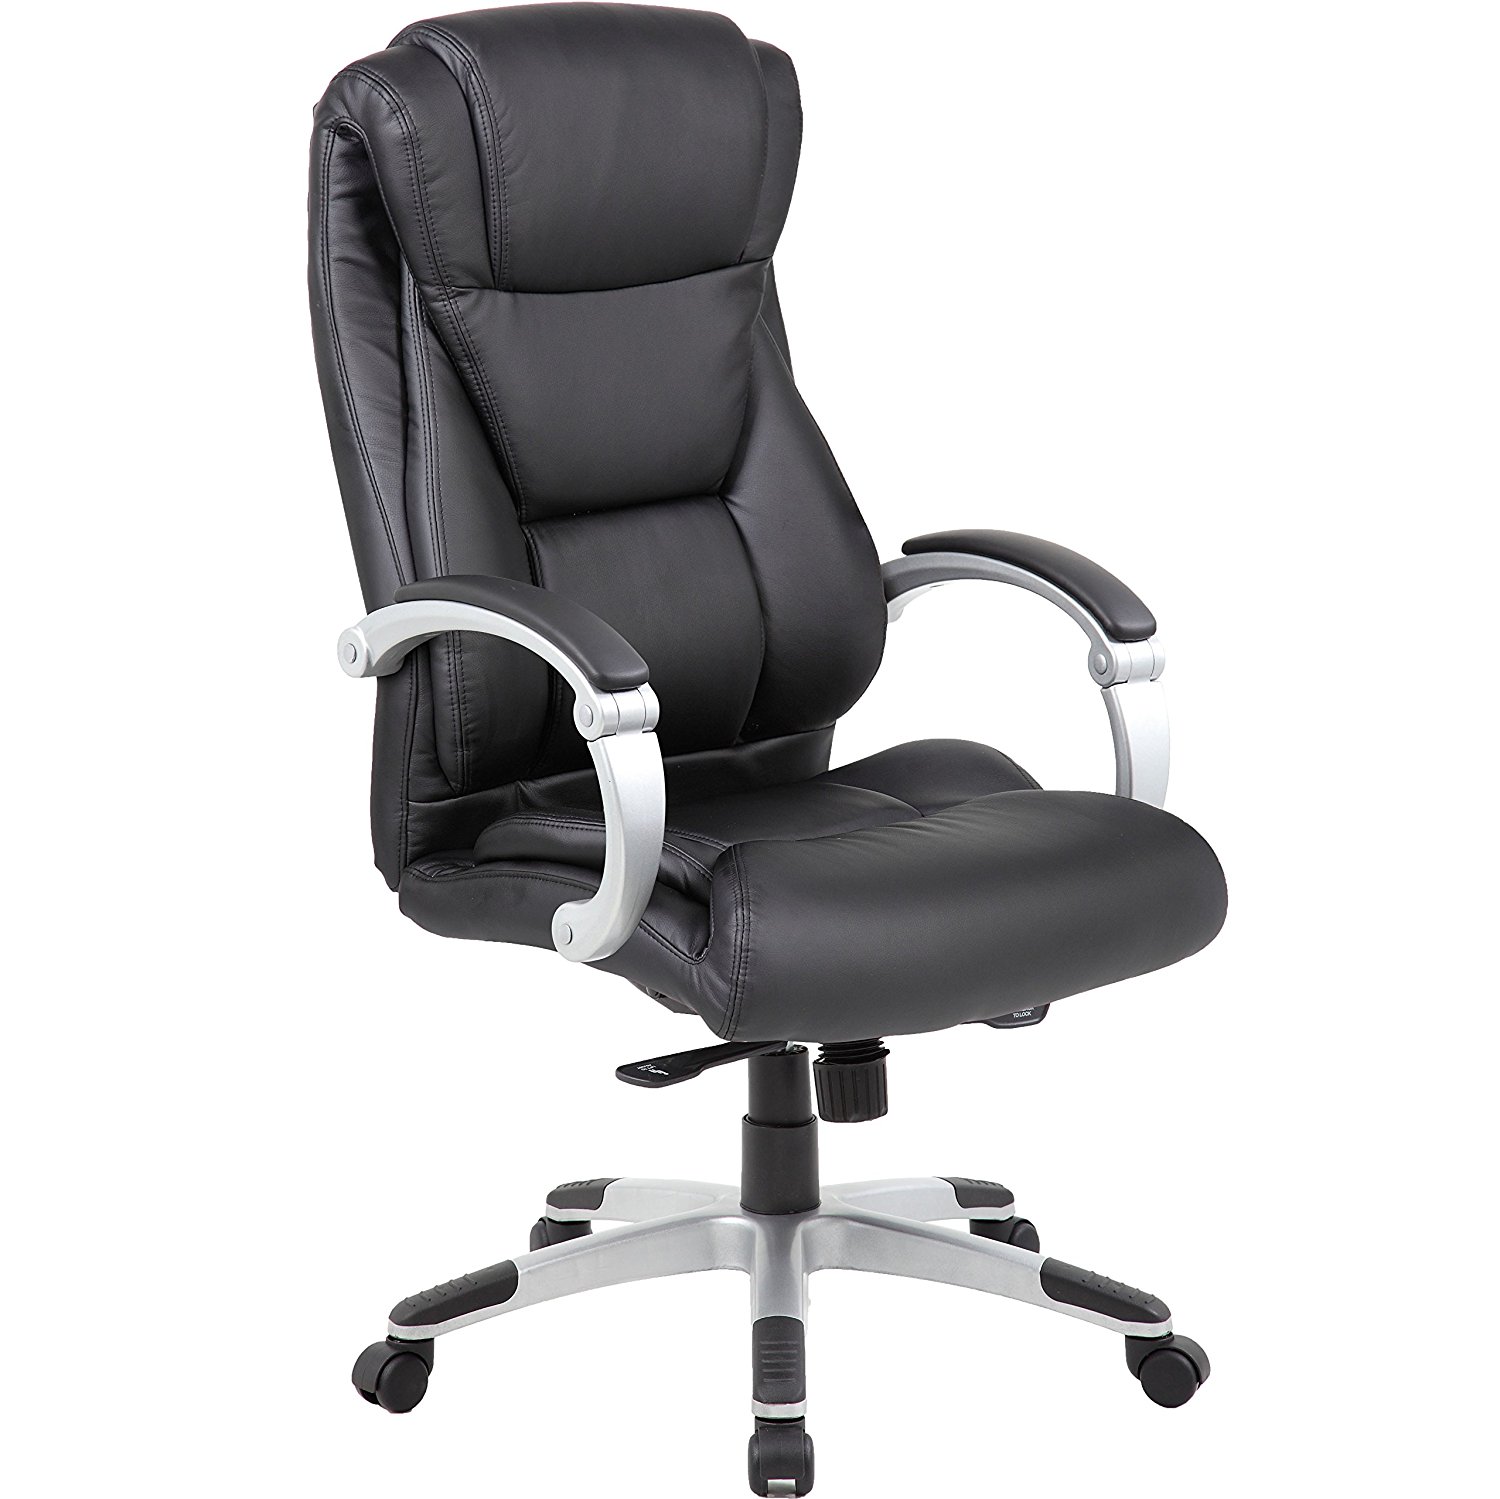 Genesis Large Executive Office Chair – Just $134.99!